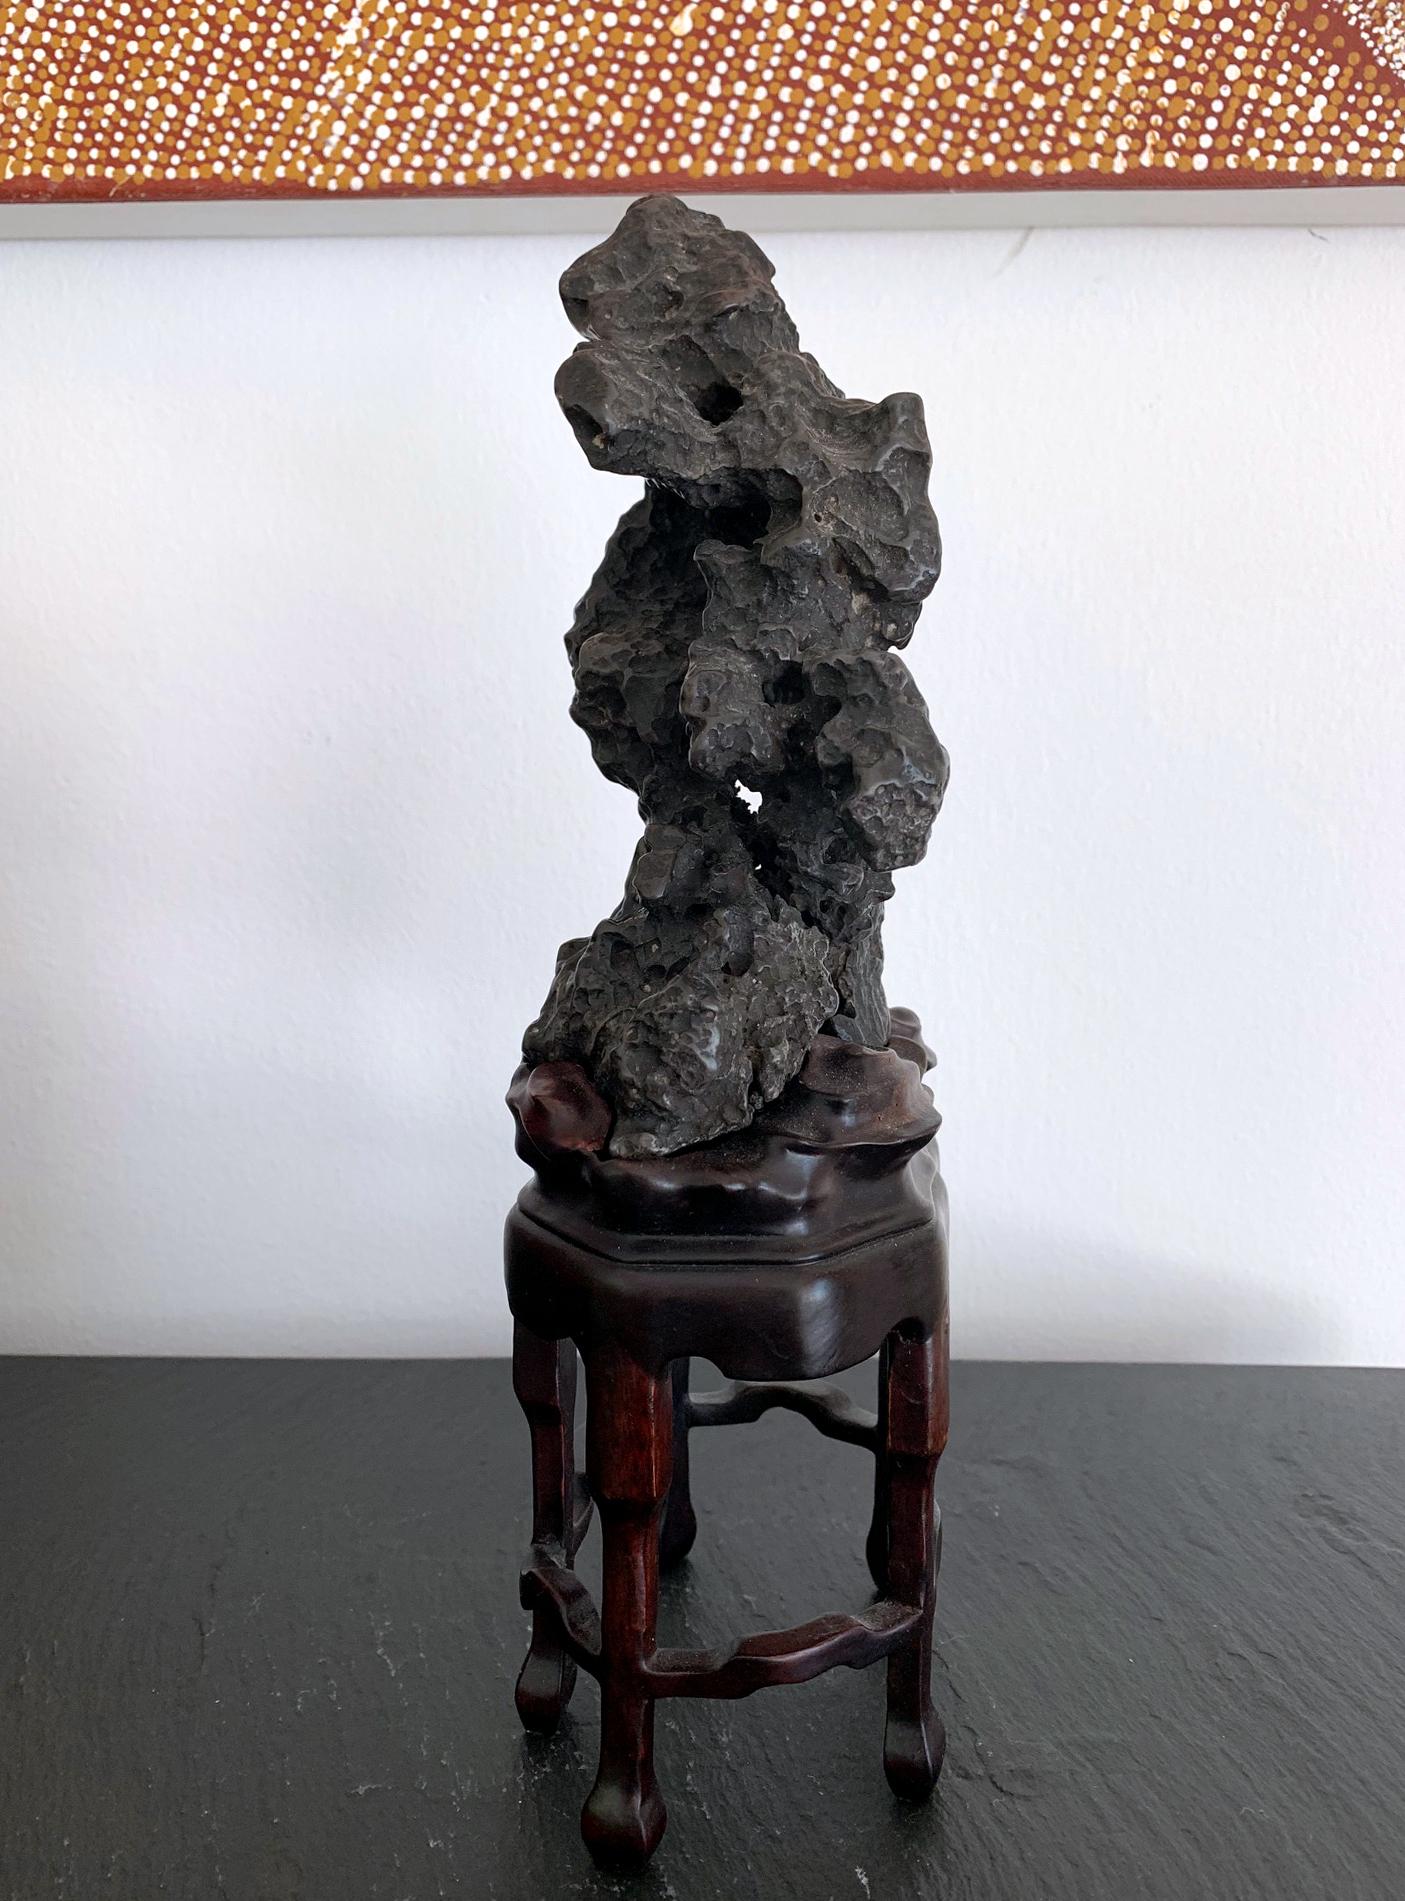 Chinese Export Chinese Scholar Rock in Metal Form on Display Stand